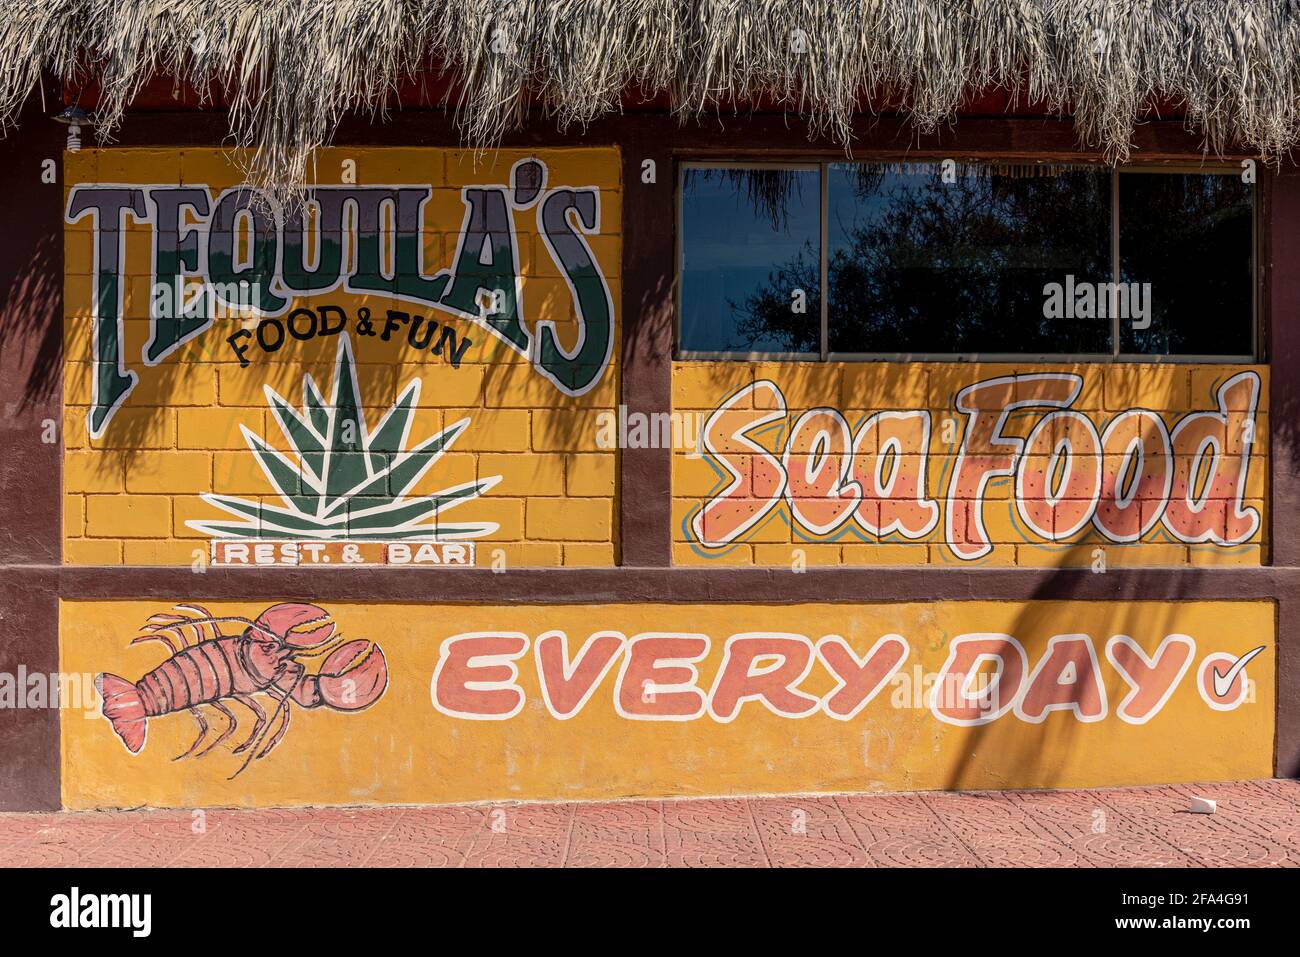 The bright yellow exterior wall of Tequila’s Restaurant in San Carlos, Sonora, Mexico. Stock Photo